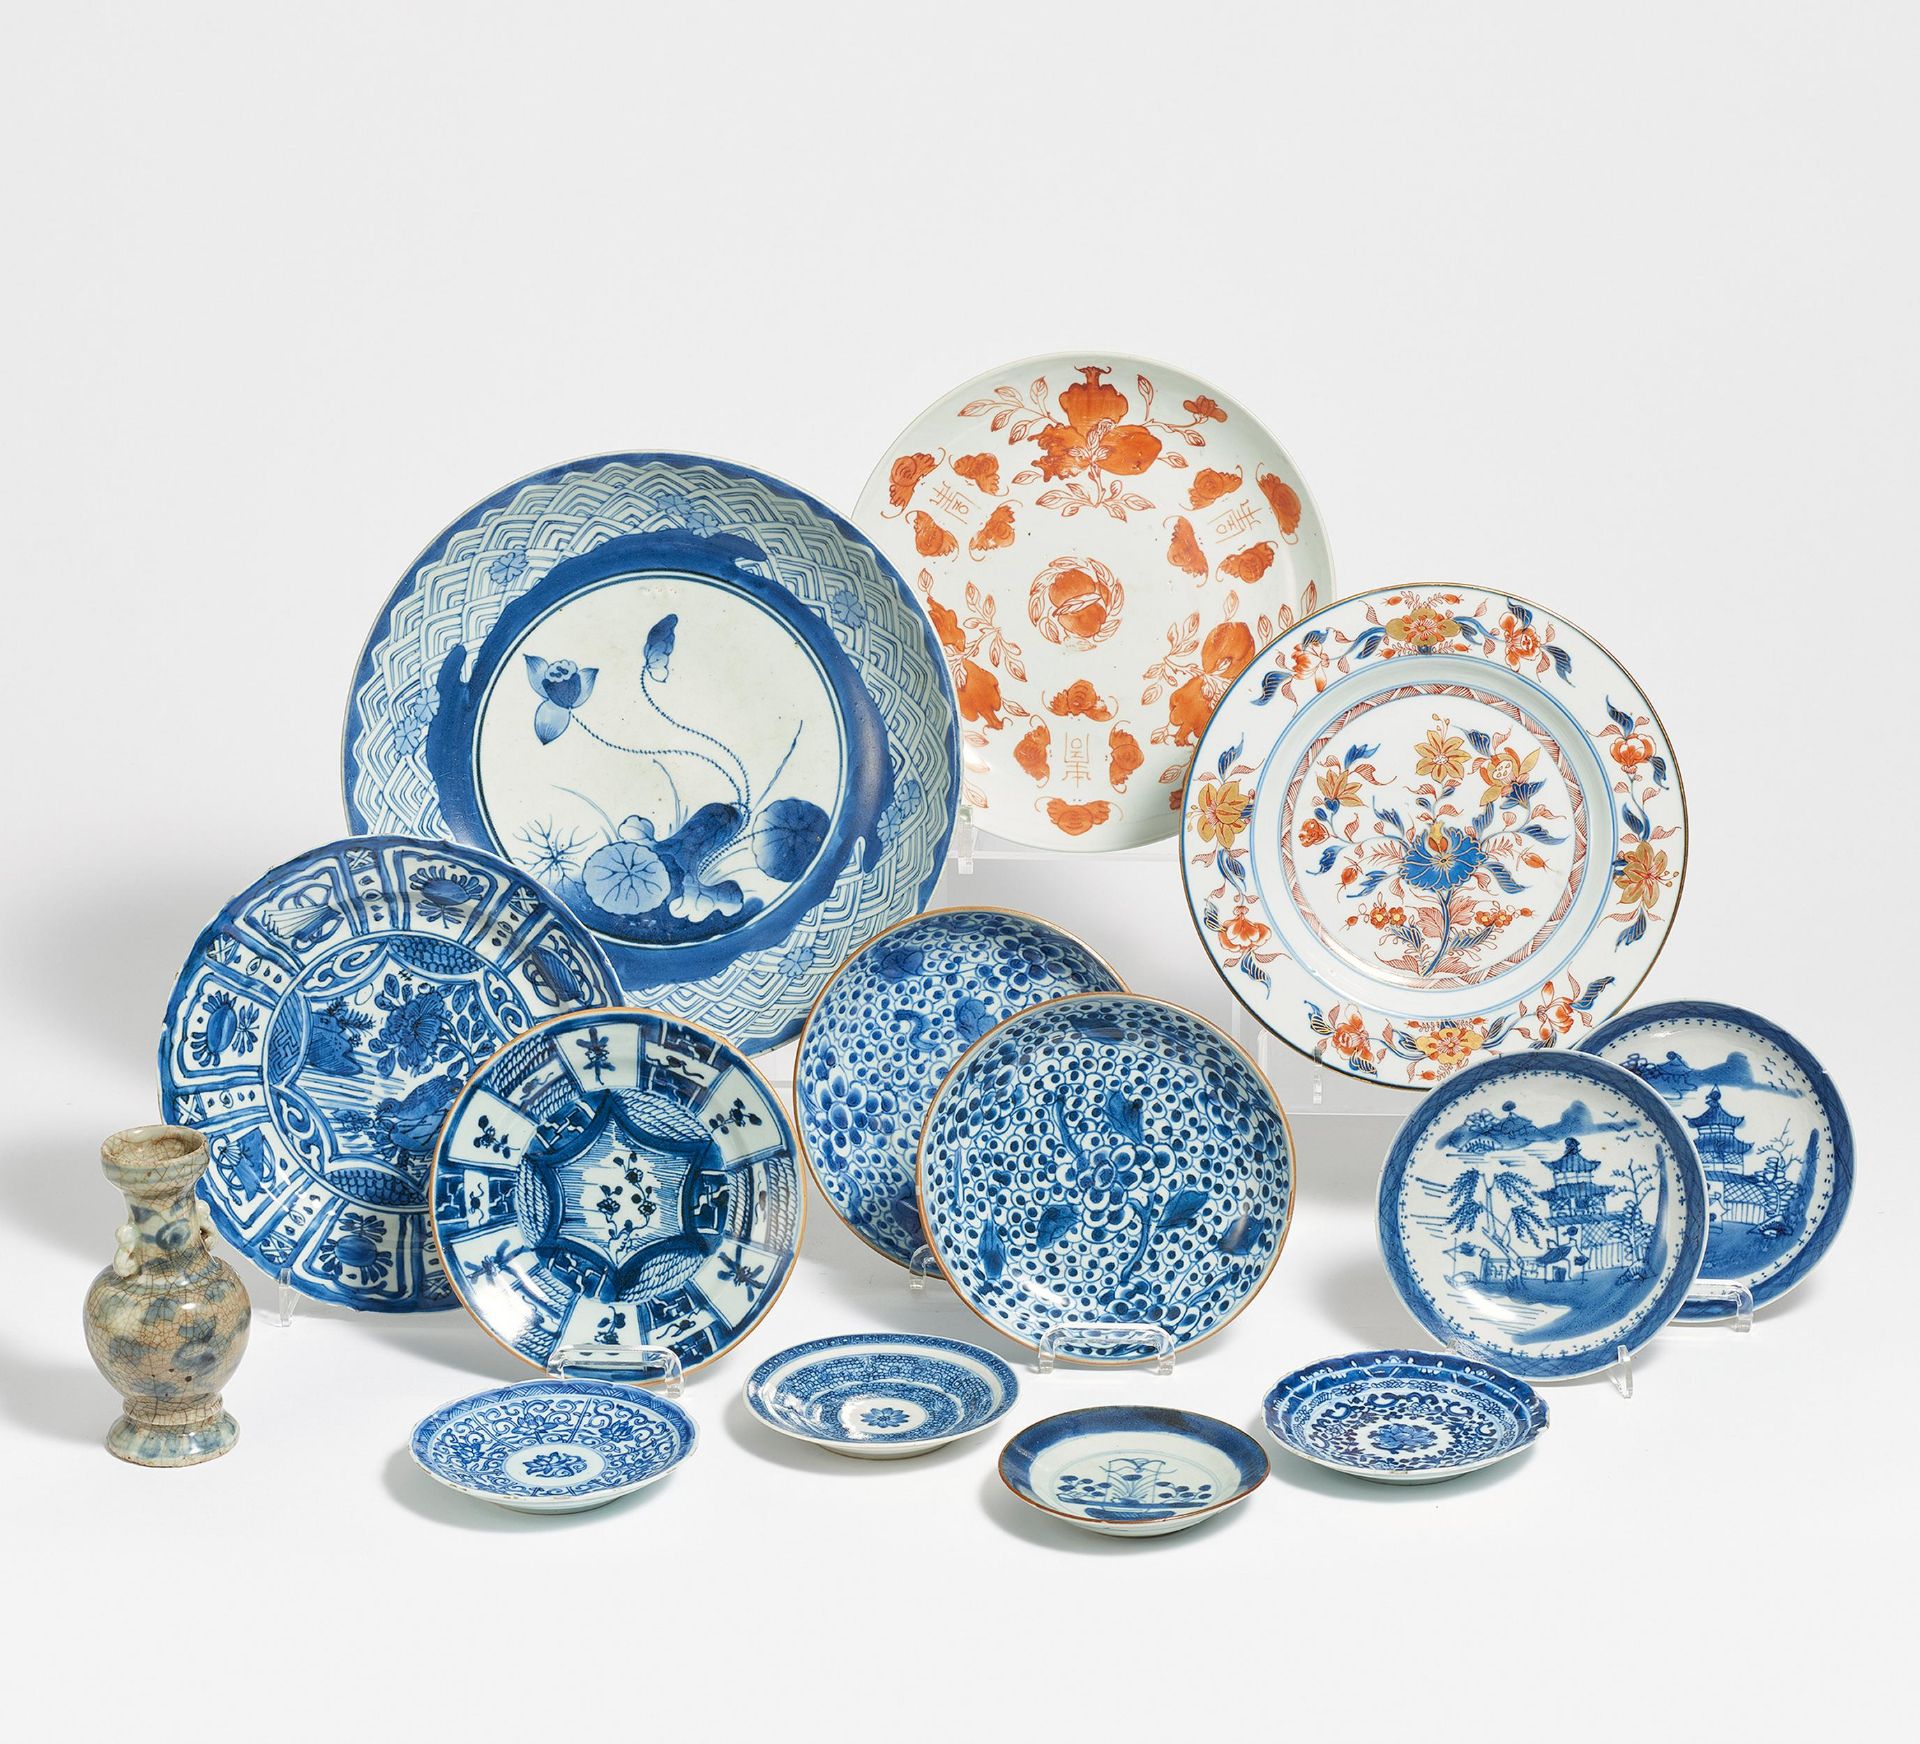 THIRTEEN DISHES AND A SMALL VASE. China/Japan. 16th-20th c. Porcelain, underglaze blue, a few with